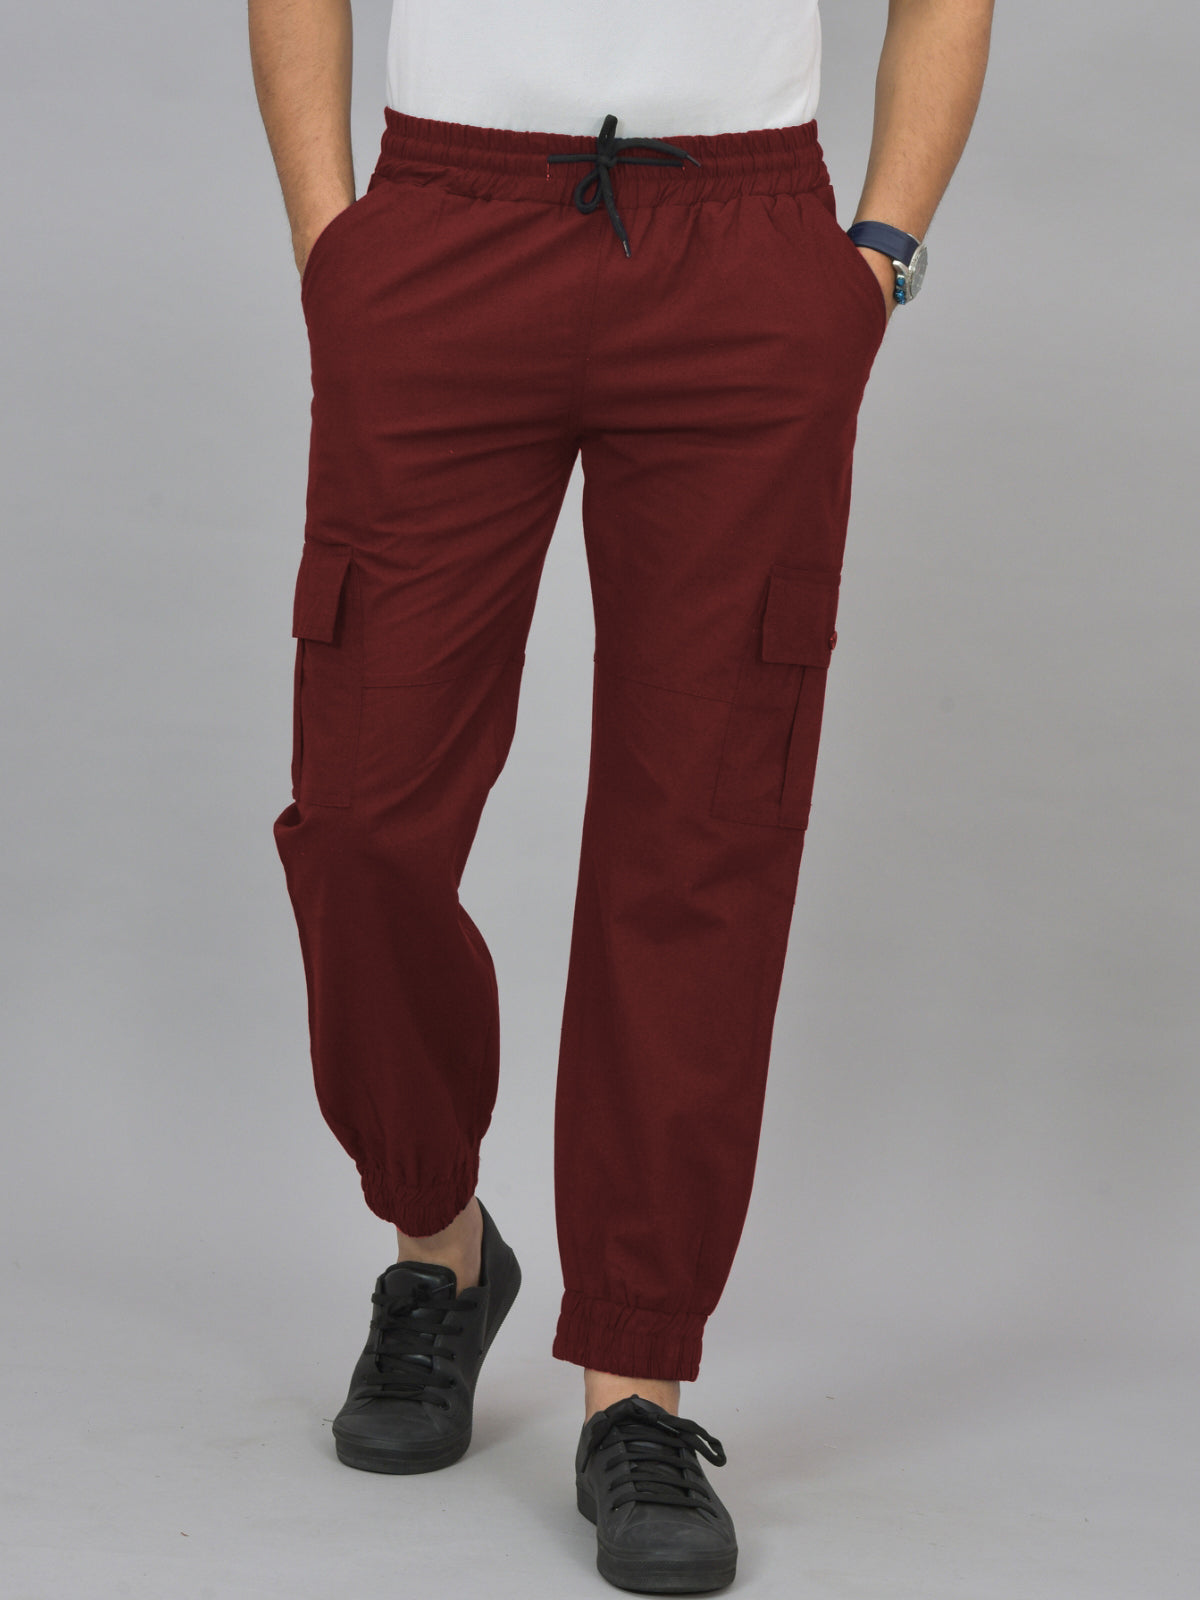 Combo Pack Of Mens Wine And Mehndi Green Five Pocket Cotton Cargo Pants